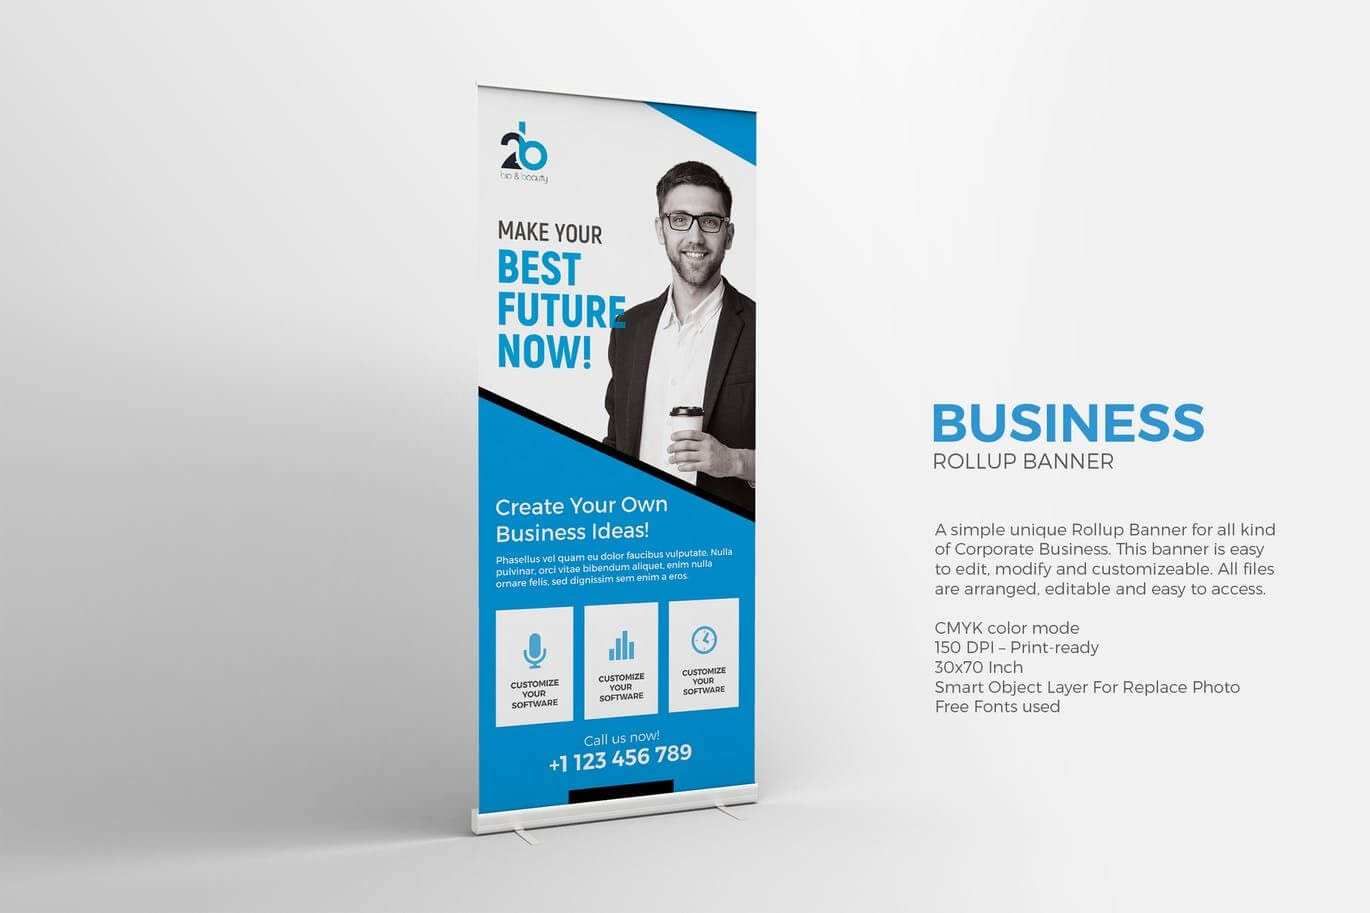 Business Roll Up Banner Template Psd | Roll Up Banner Design Intended For Retractable Banner Design Templates